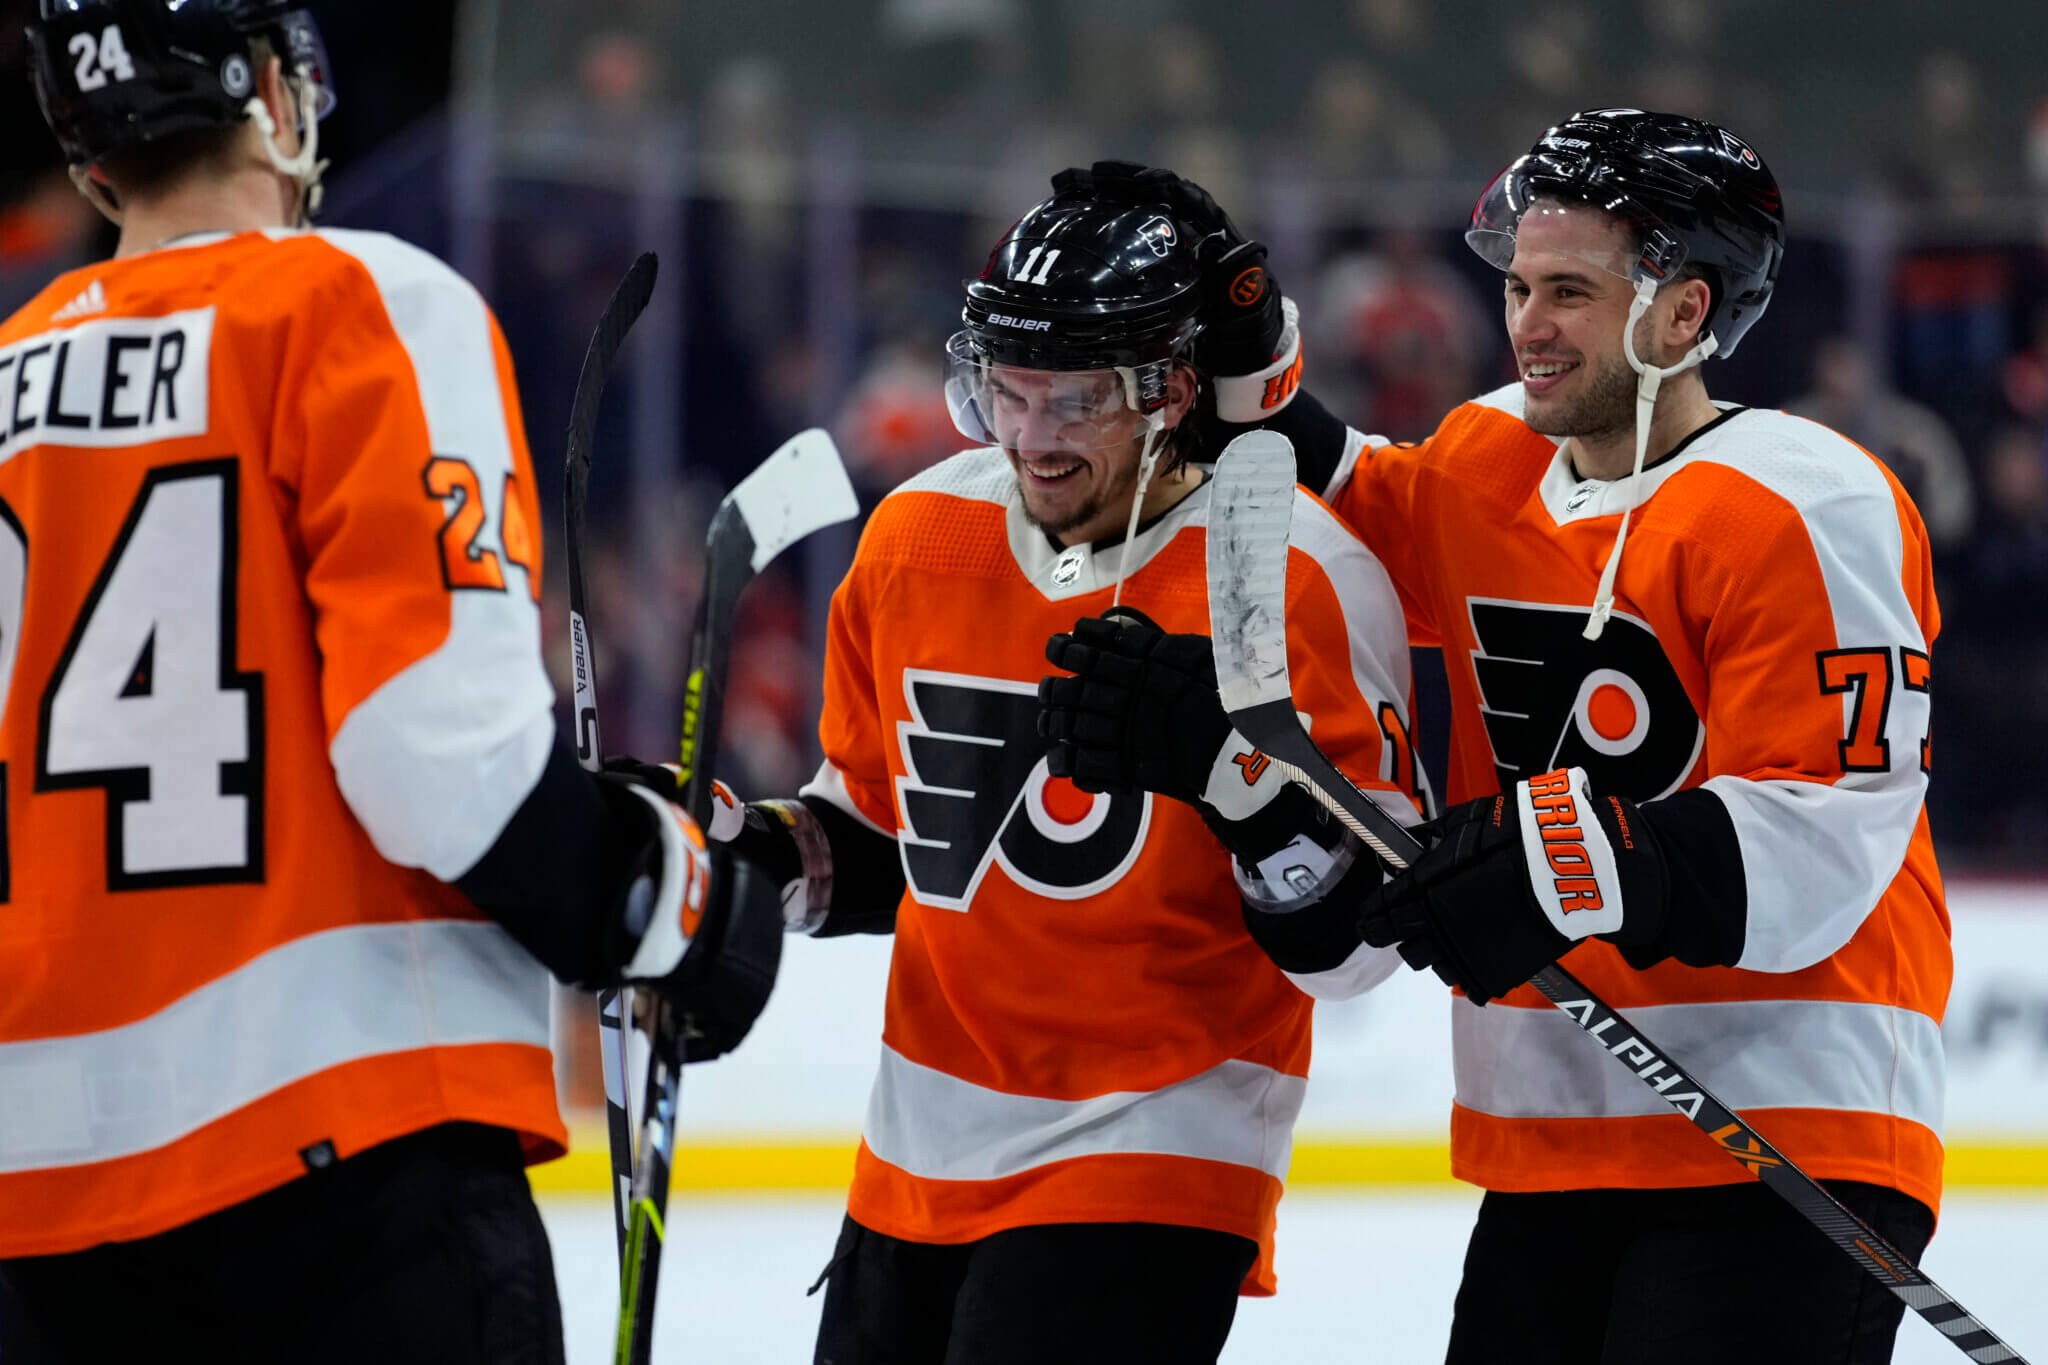 Konecny joins Hart as an untouchable on the Flyers’ roster